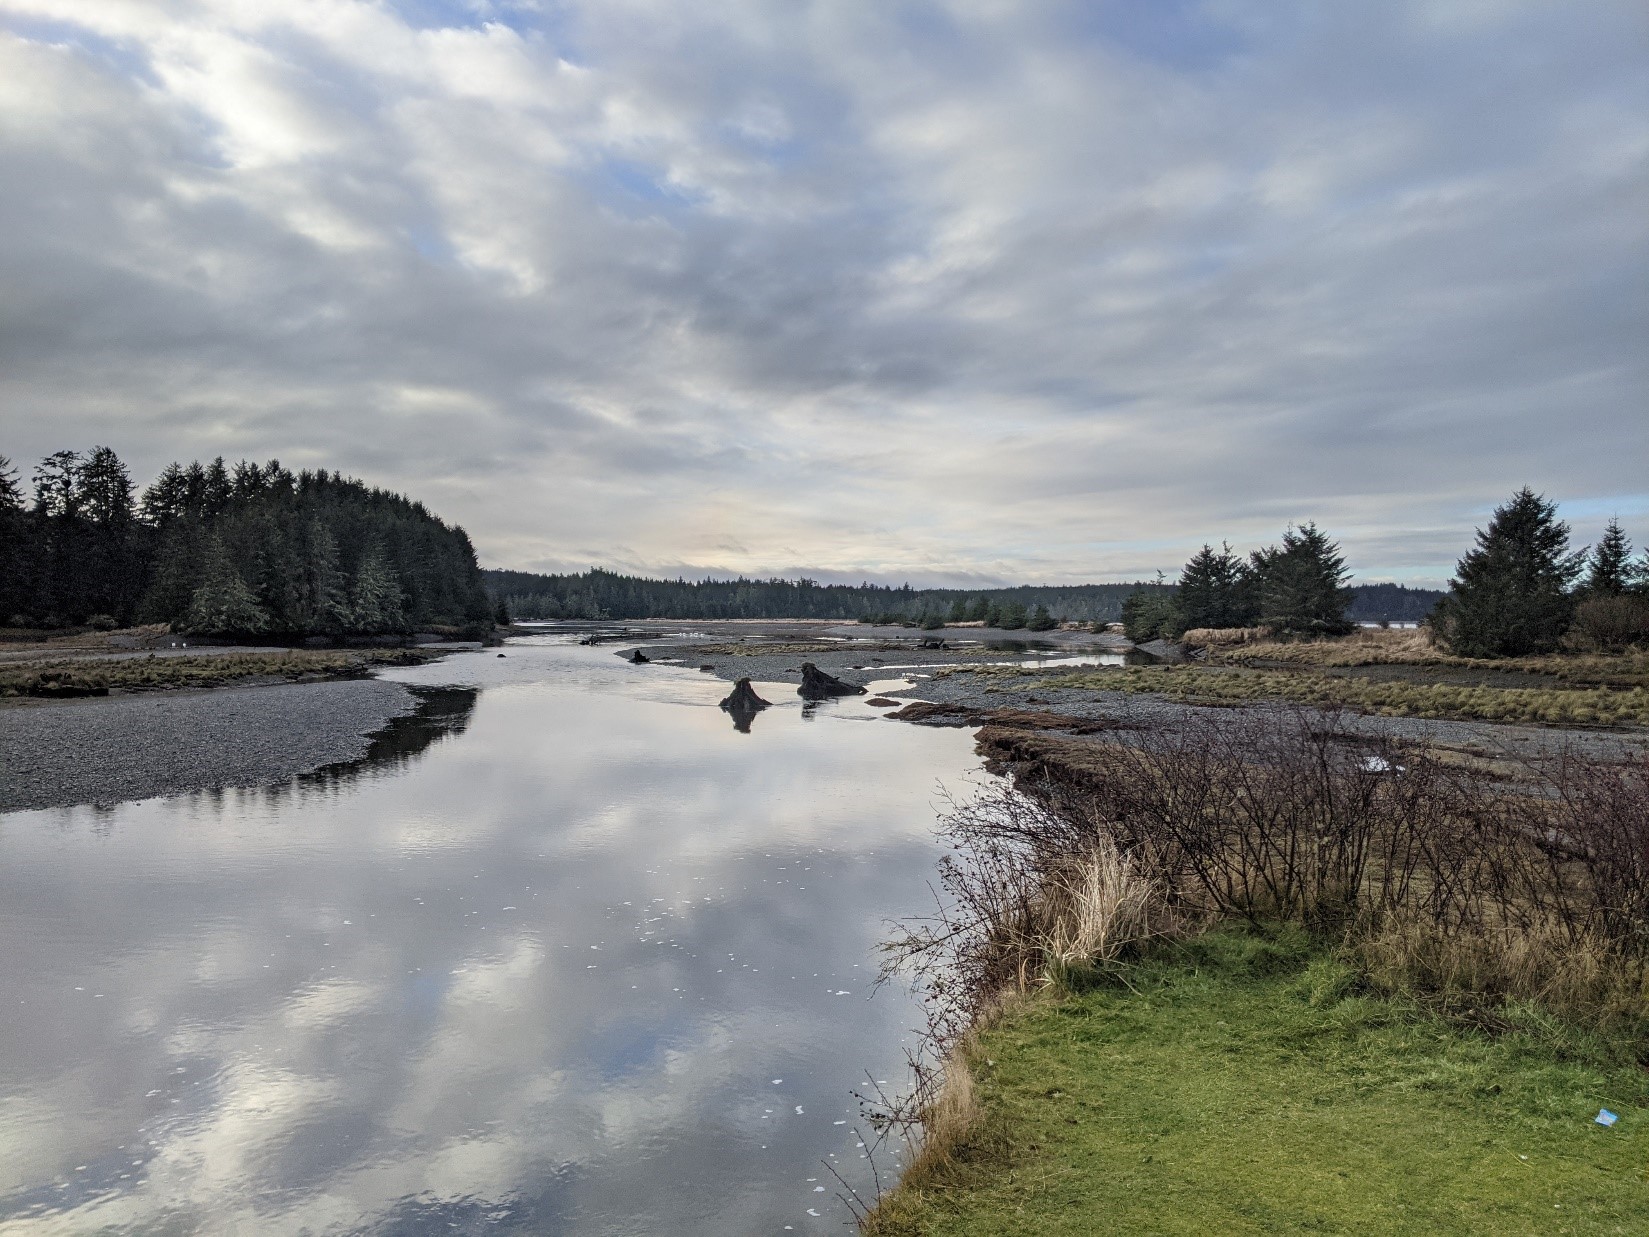 The Cluxewe River follows a natural berm parallel to shore for several hundred meters parallel to the shoreline before opening up into Queen Charlotte Strait.